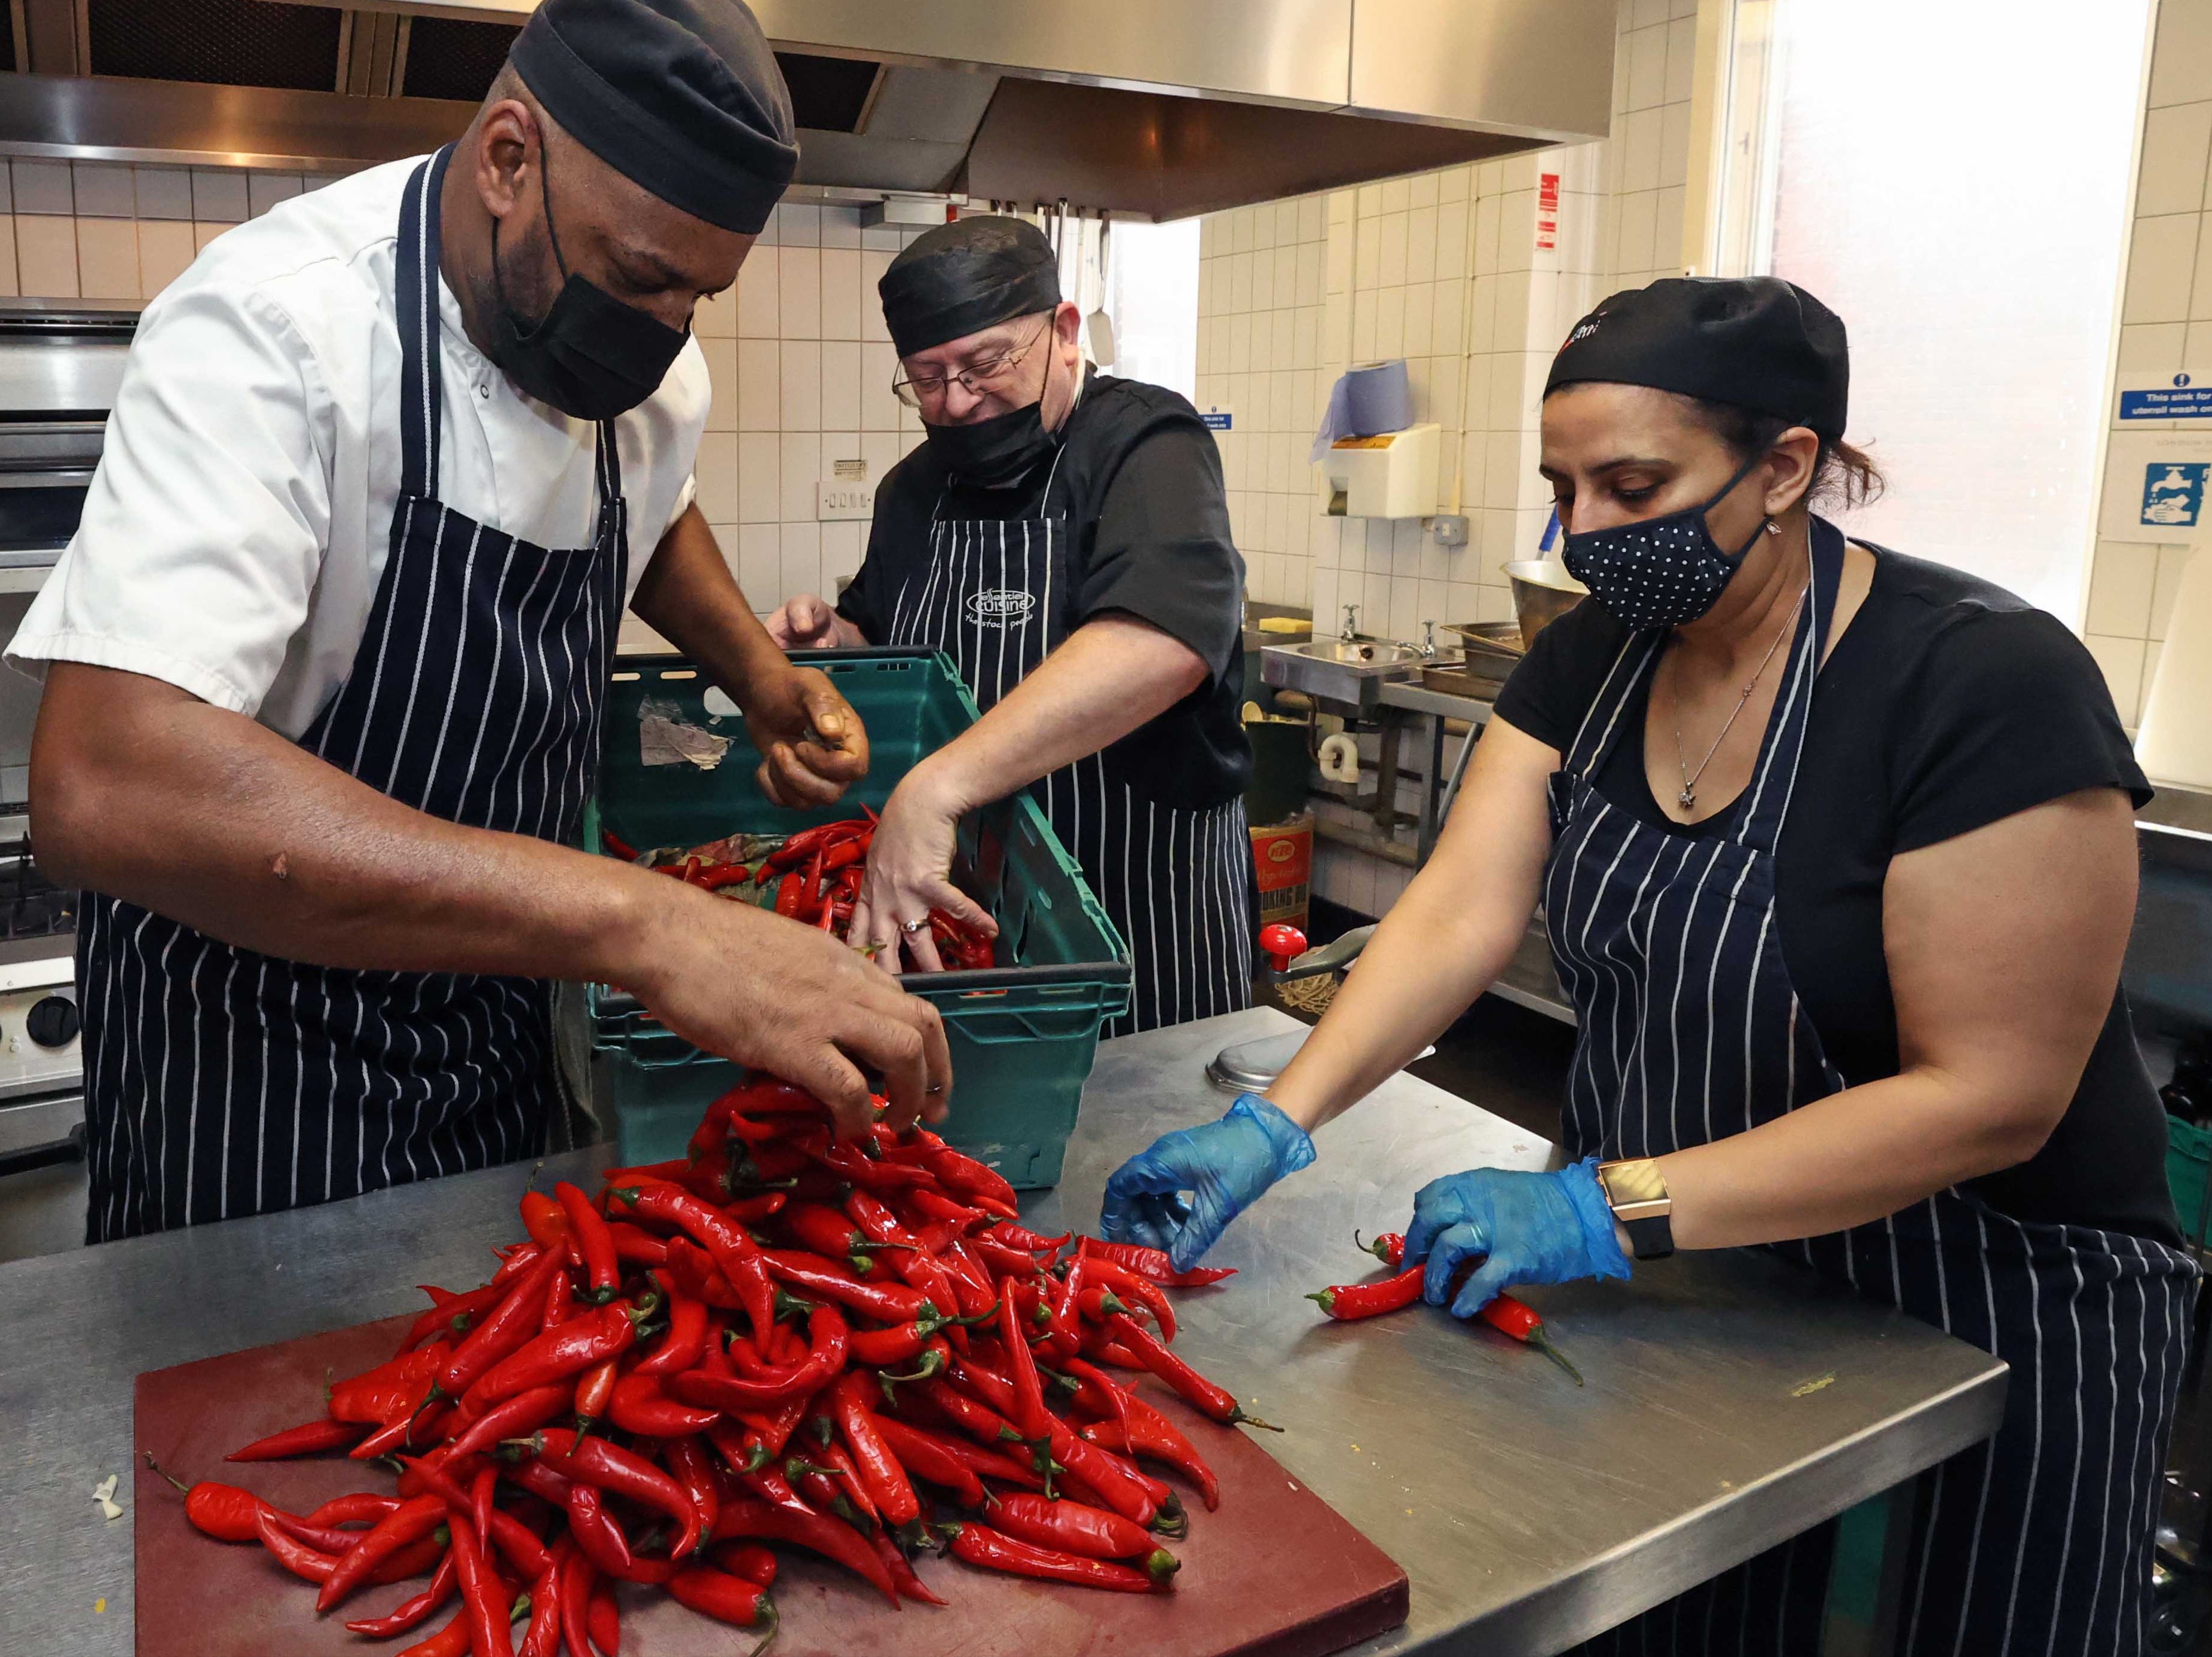 The team at Scottish House, London, where meals for our Help the Hungry campaign are currently prepared